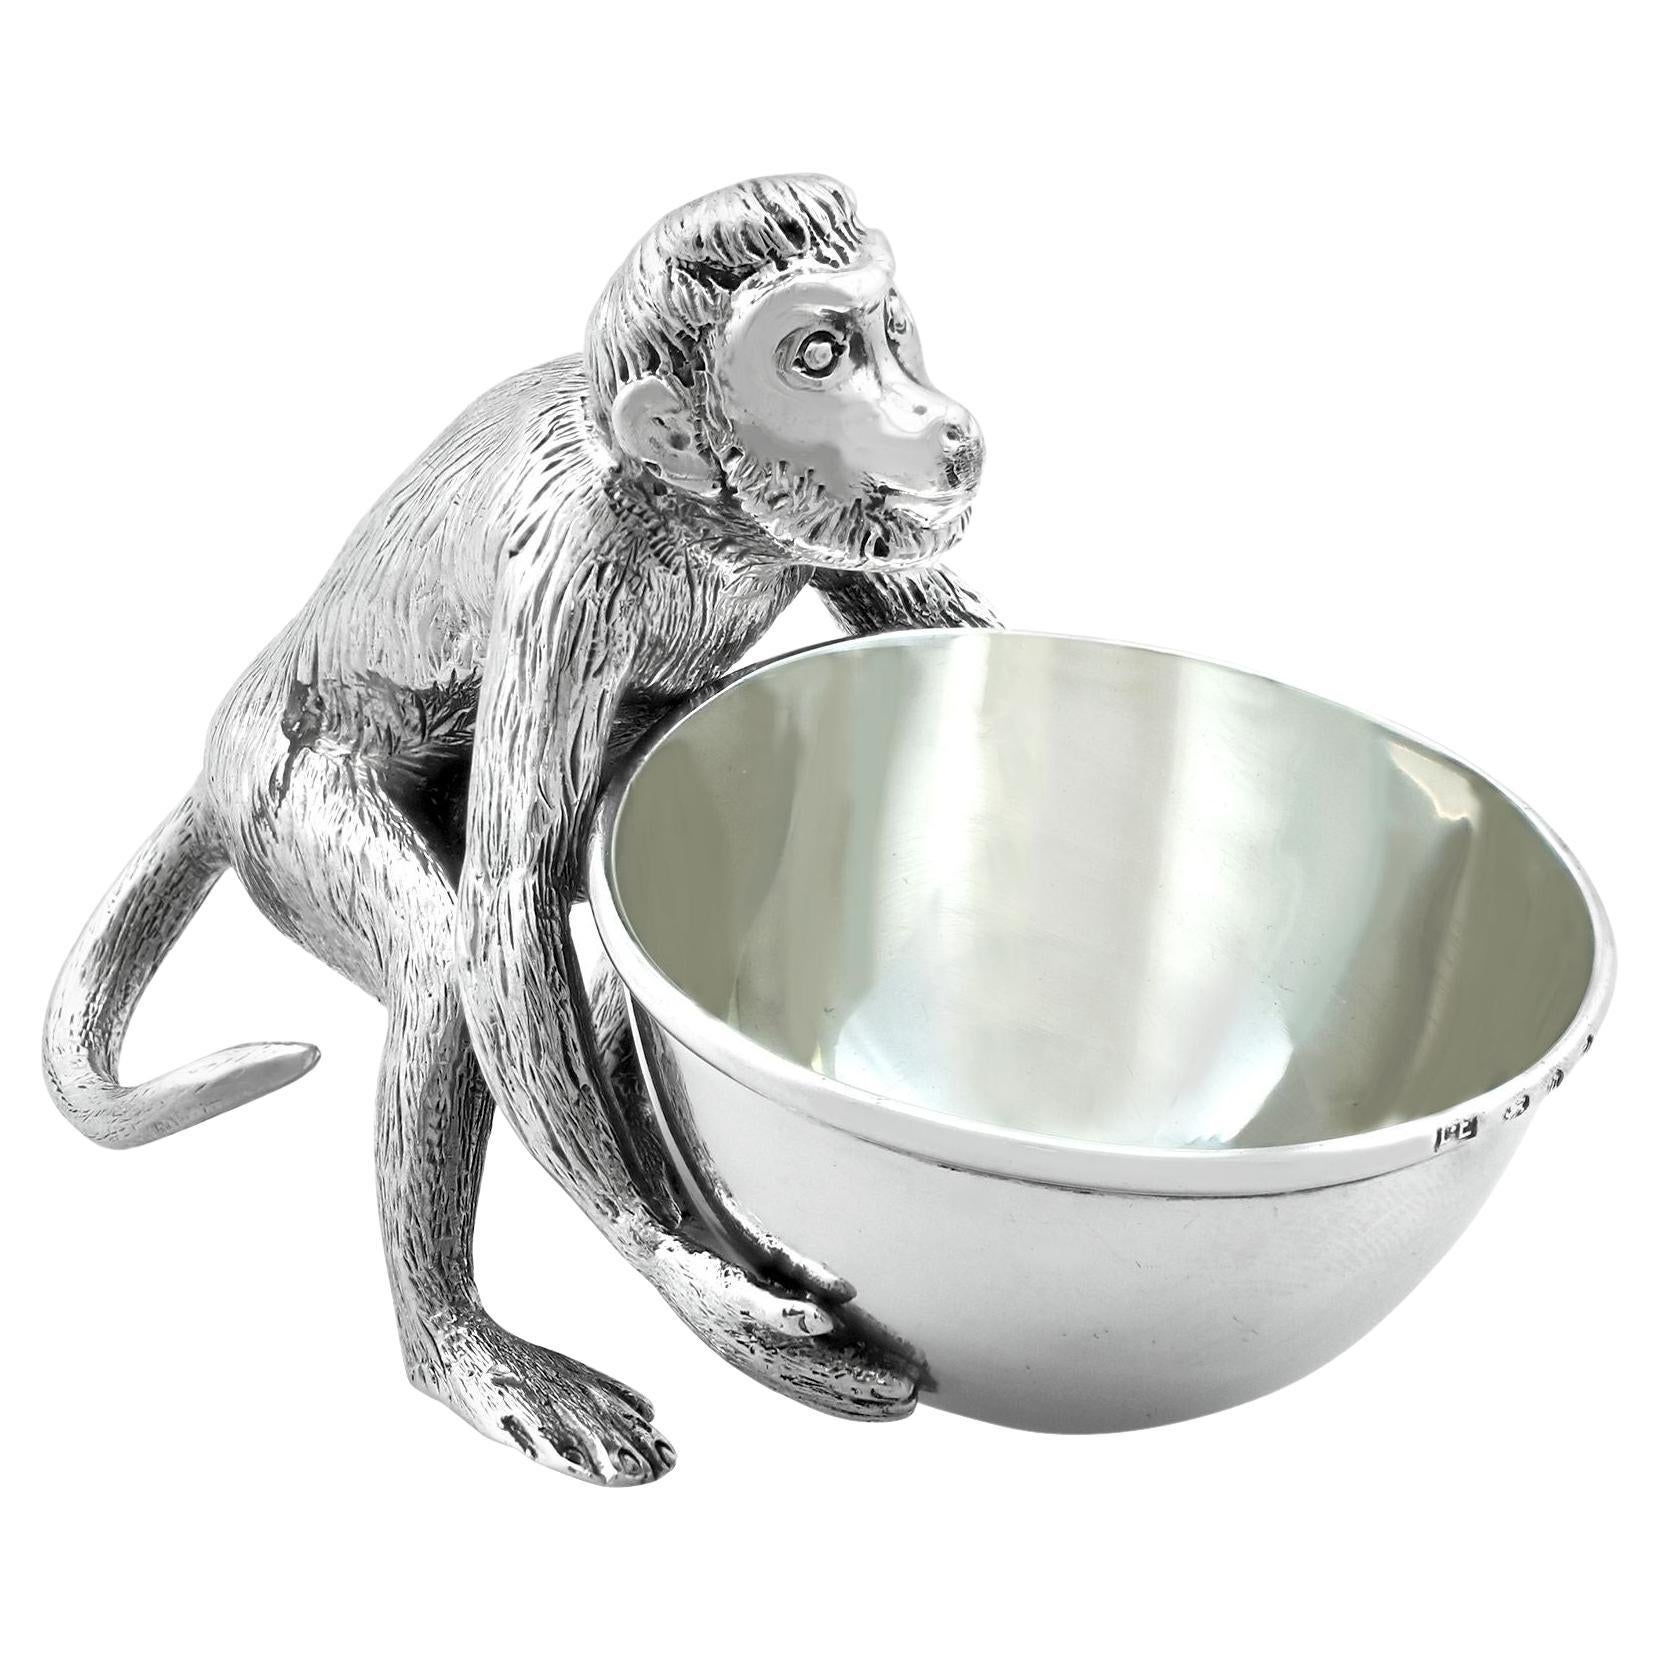 Antique Victorian Sterling Silver Monkey Bowl